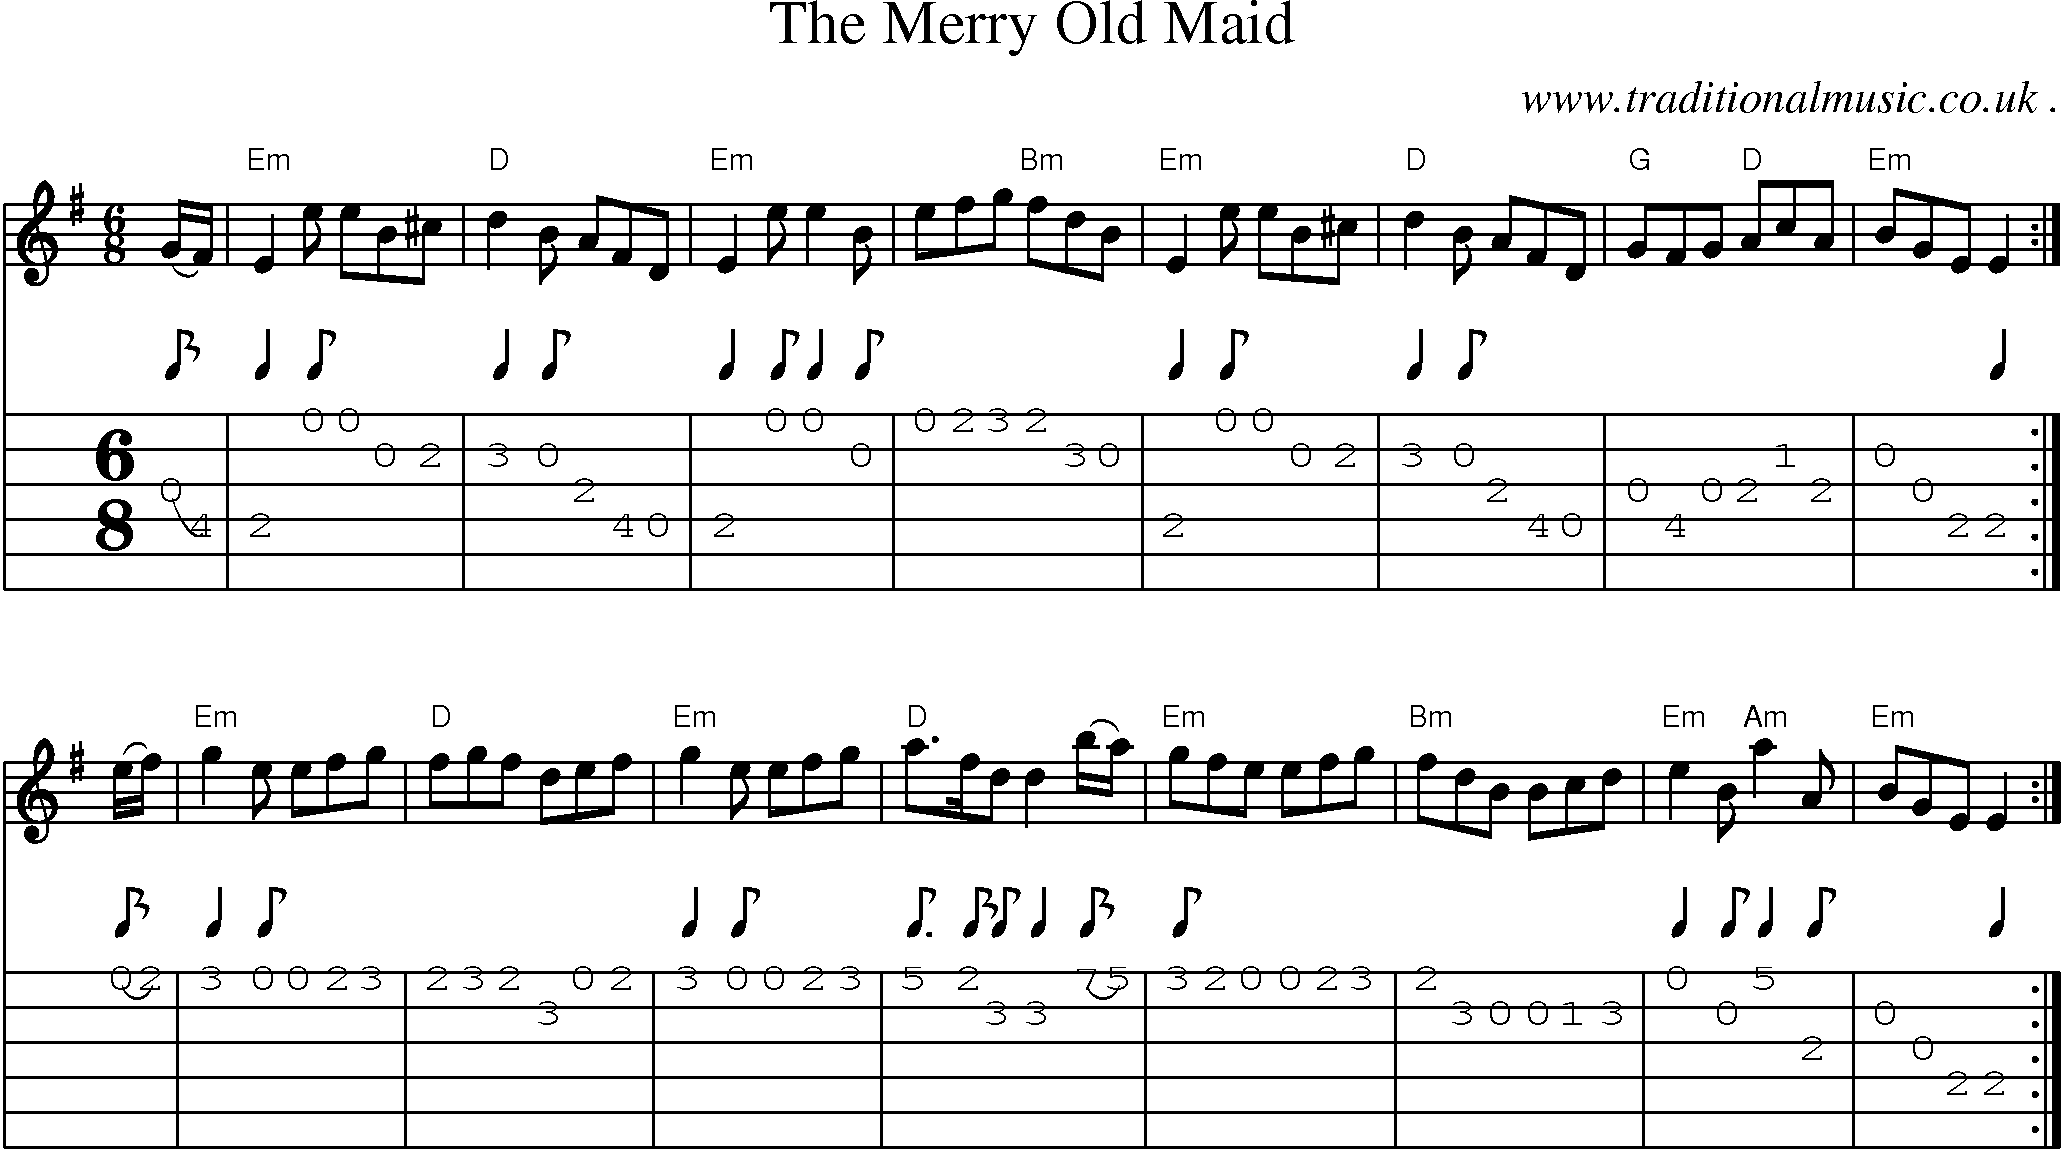 Music Score and Guitar Tabs for The Merry Old Maid